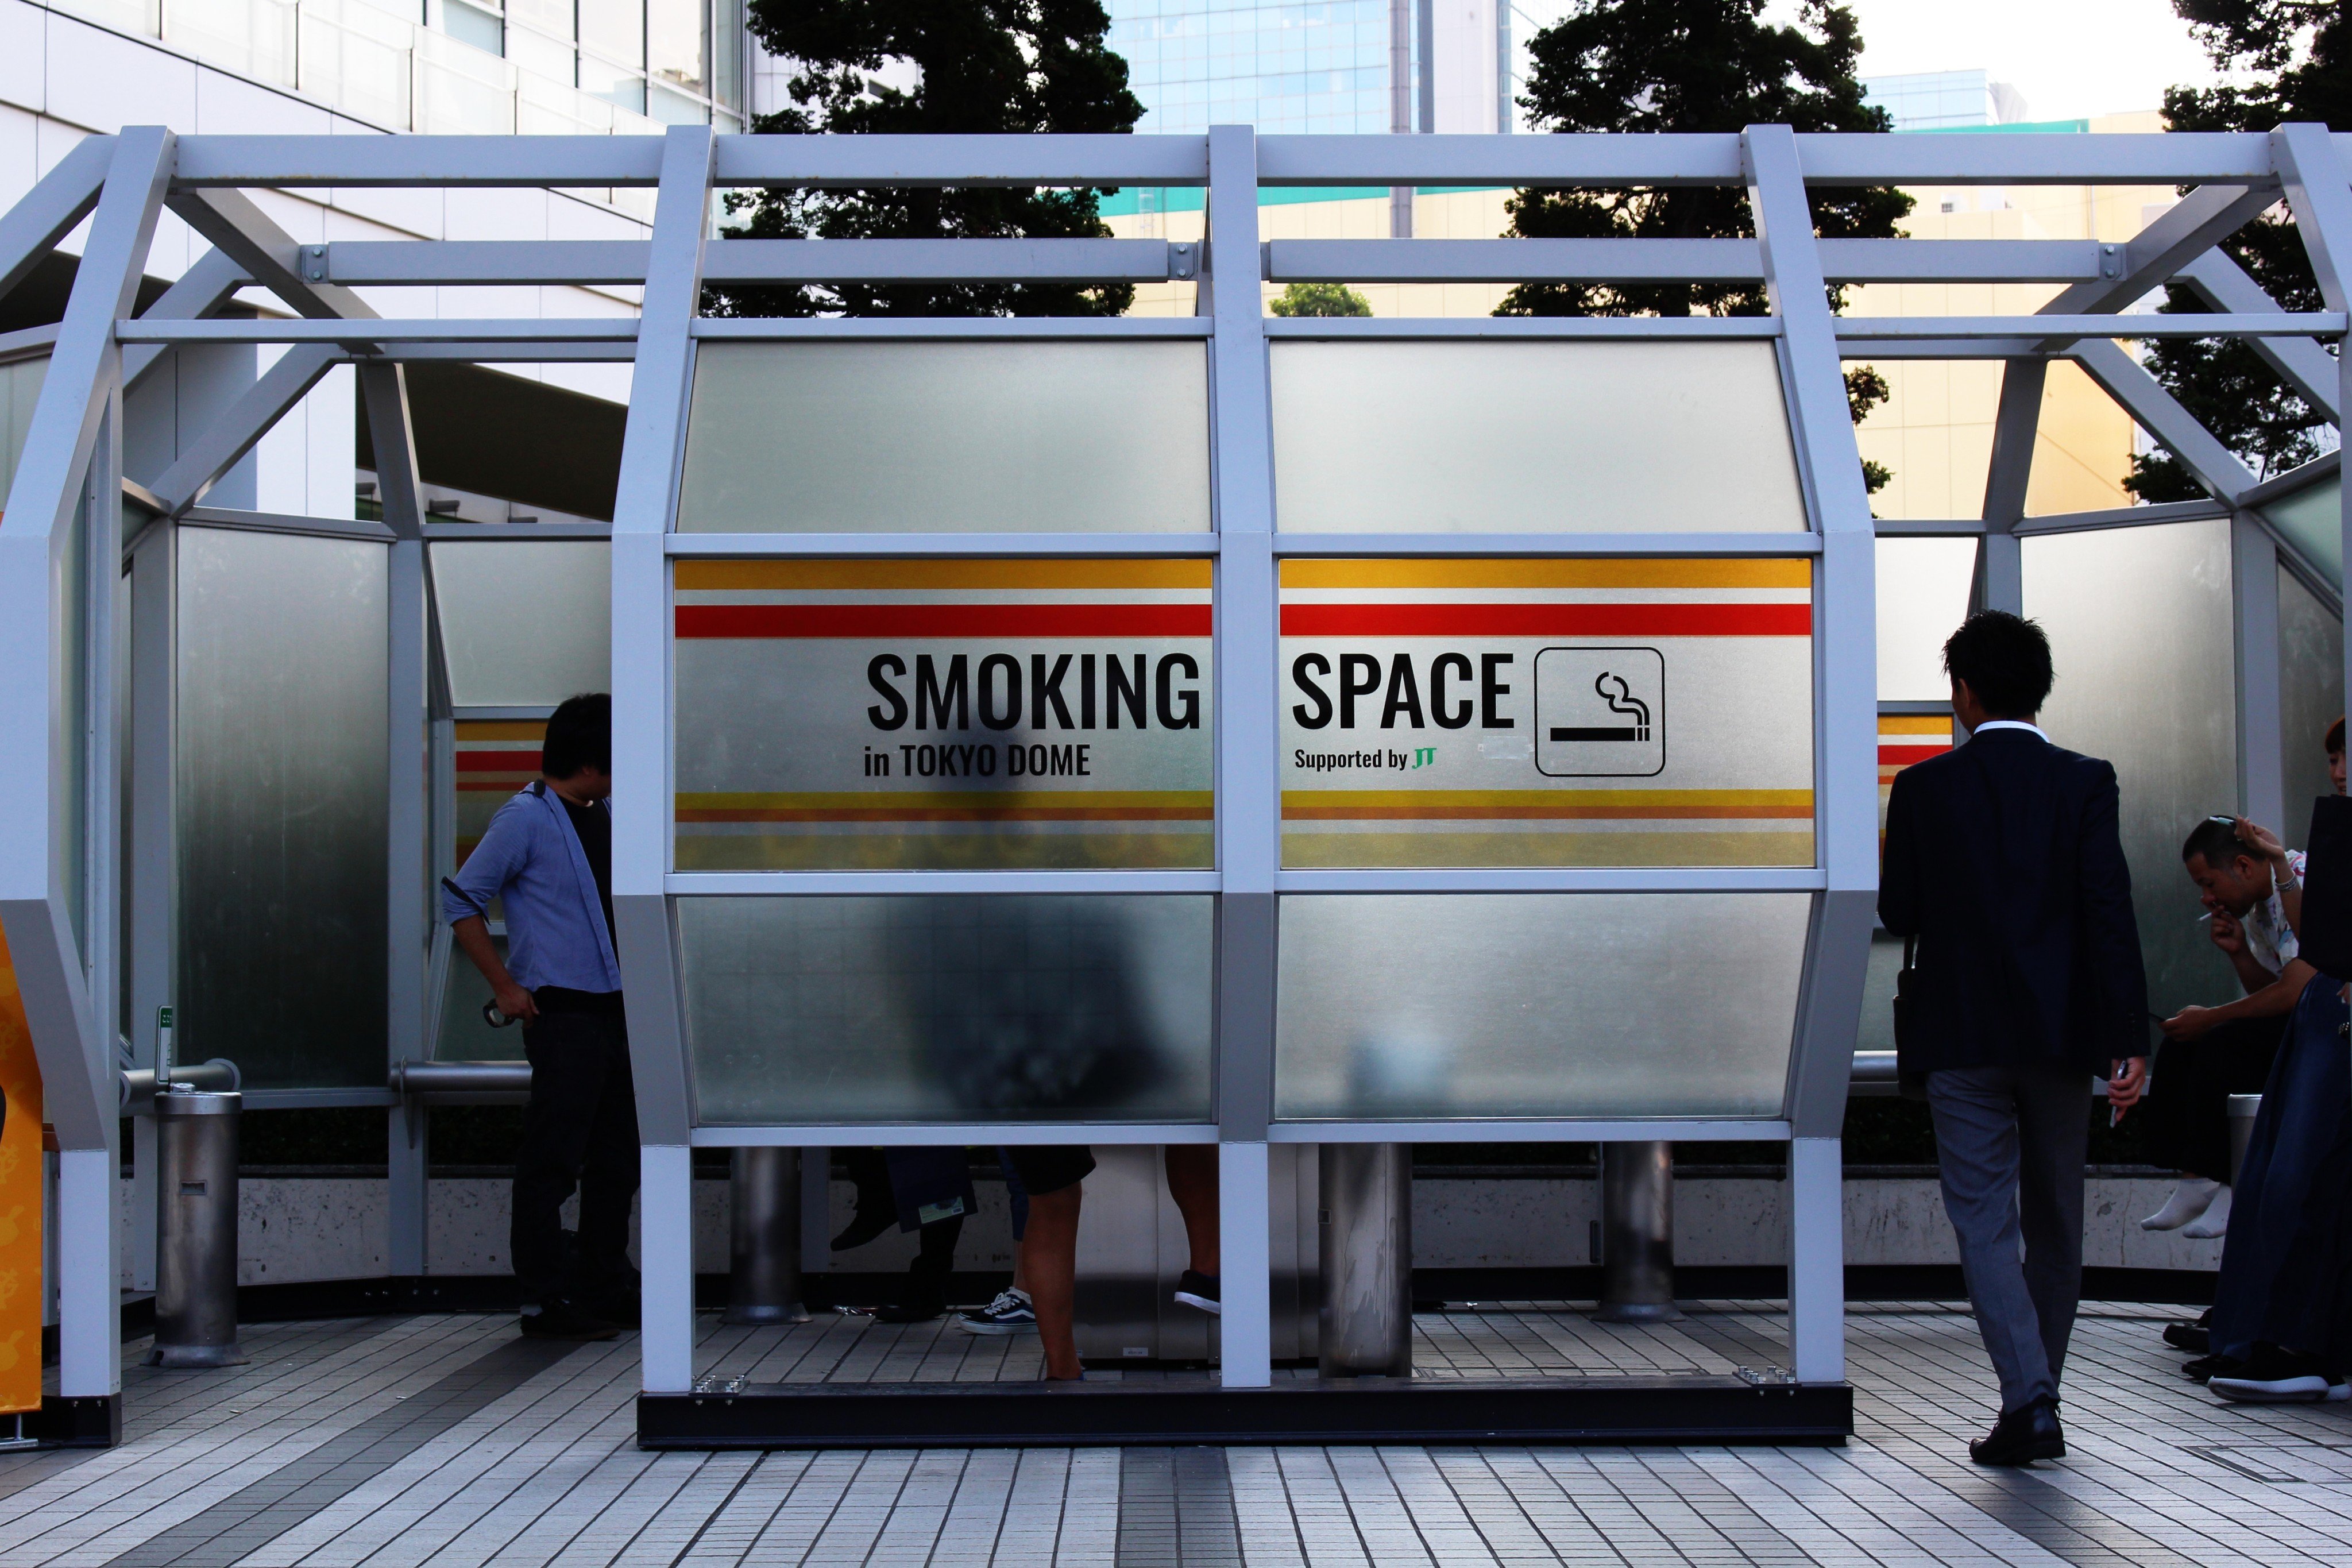 People use a smoking space in Tokyo. Photo: Shutterstock